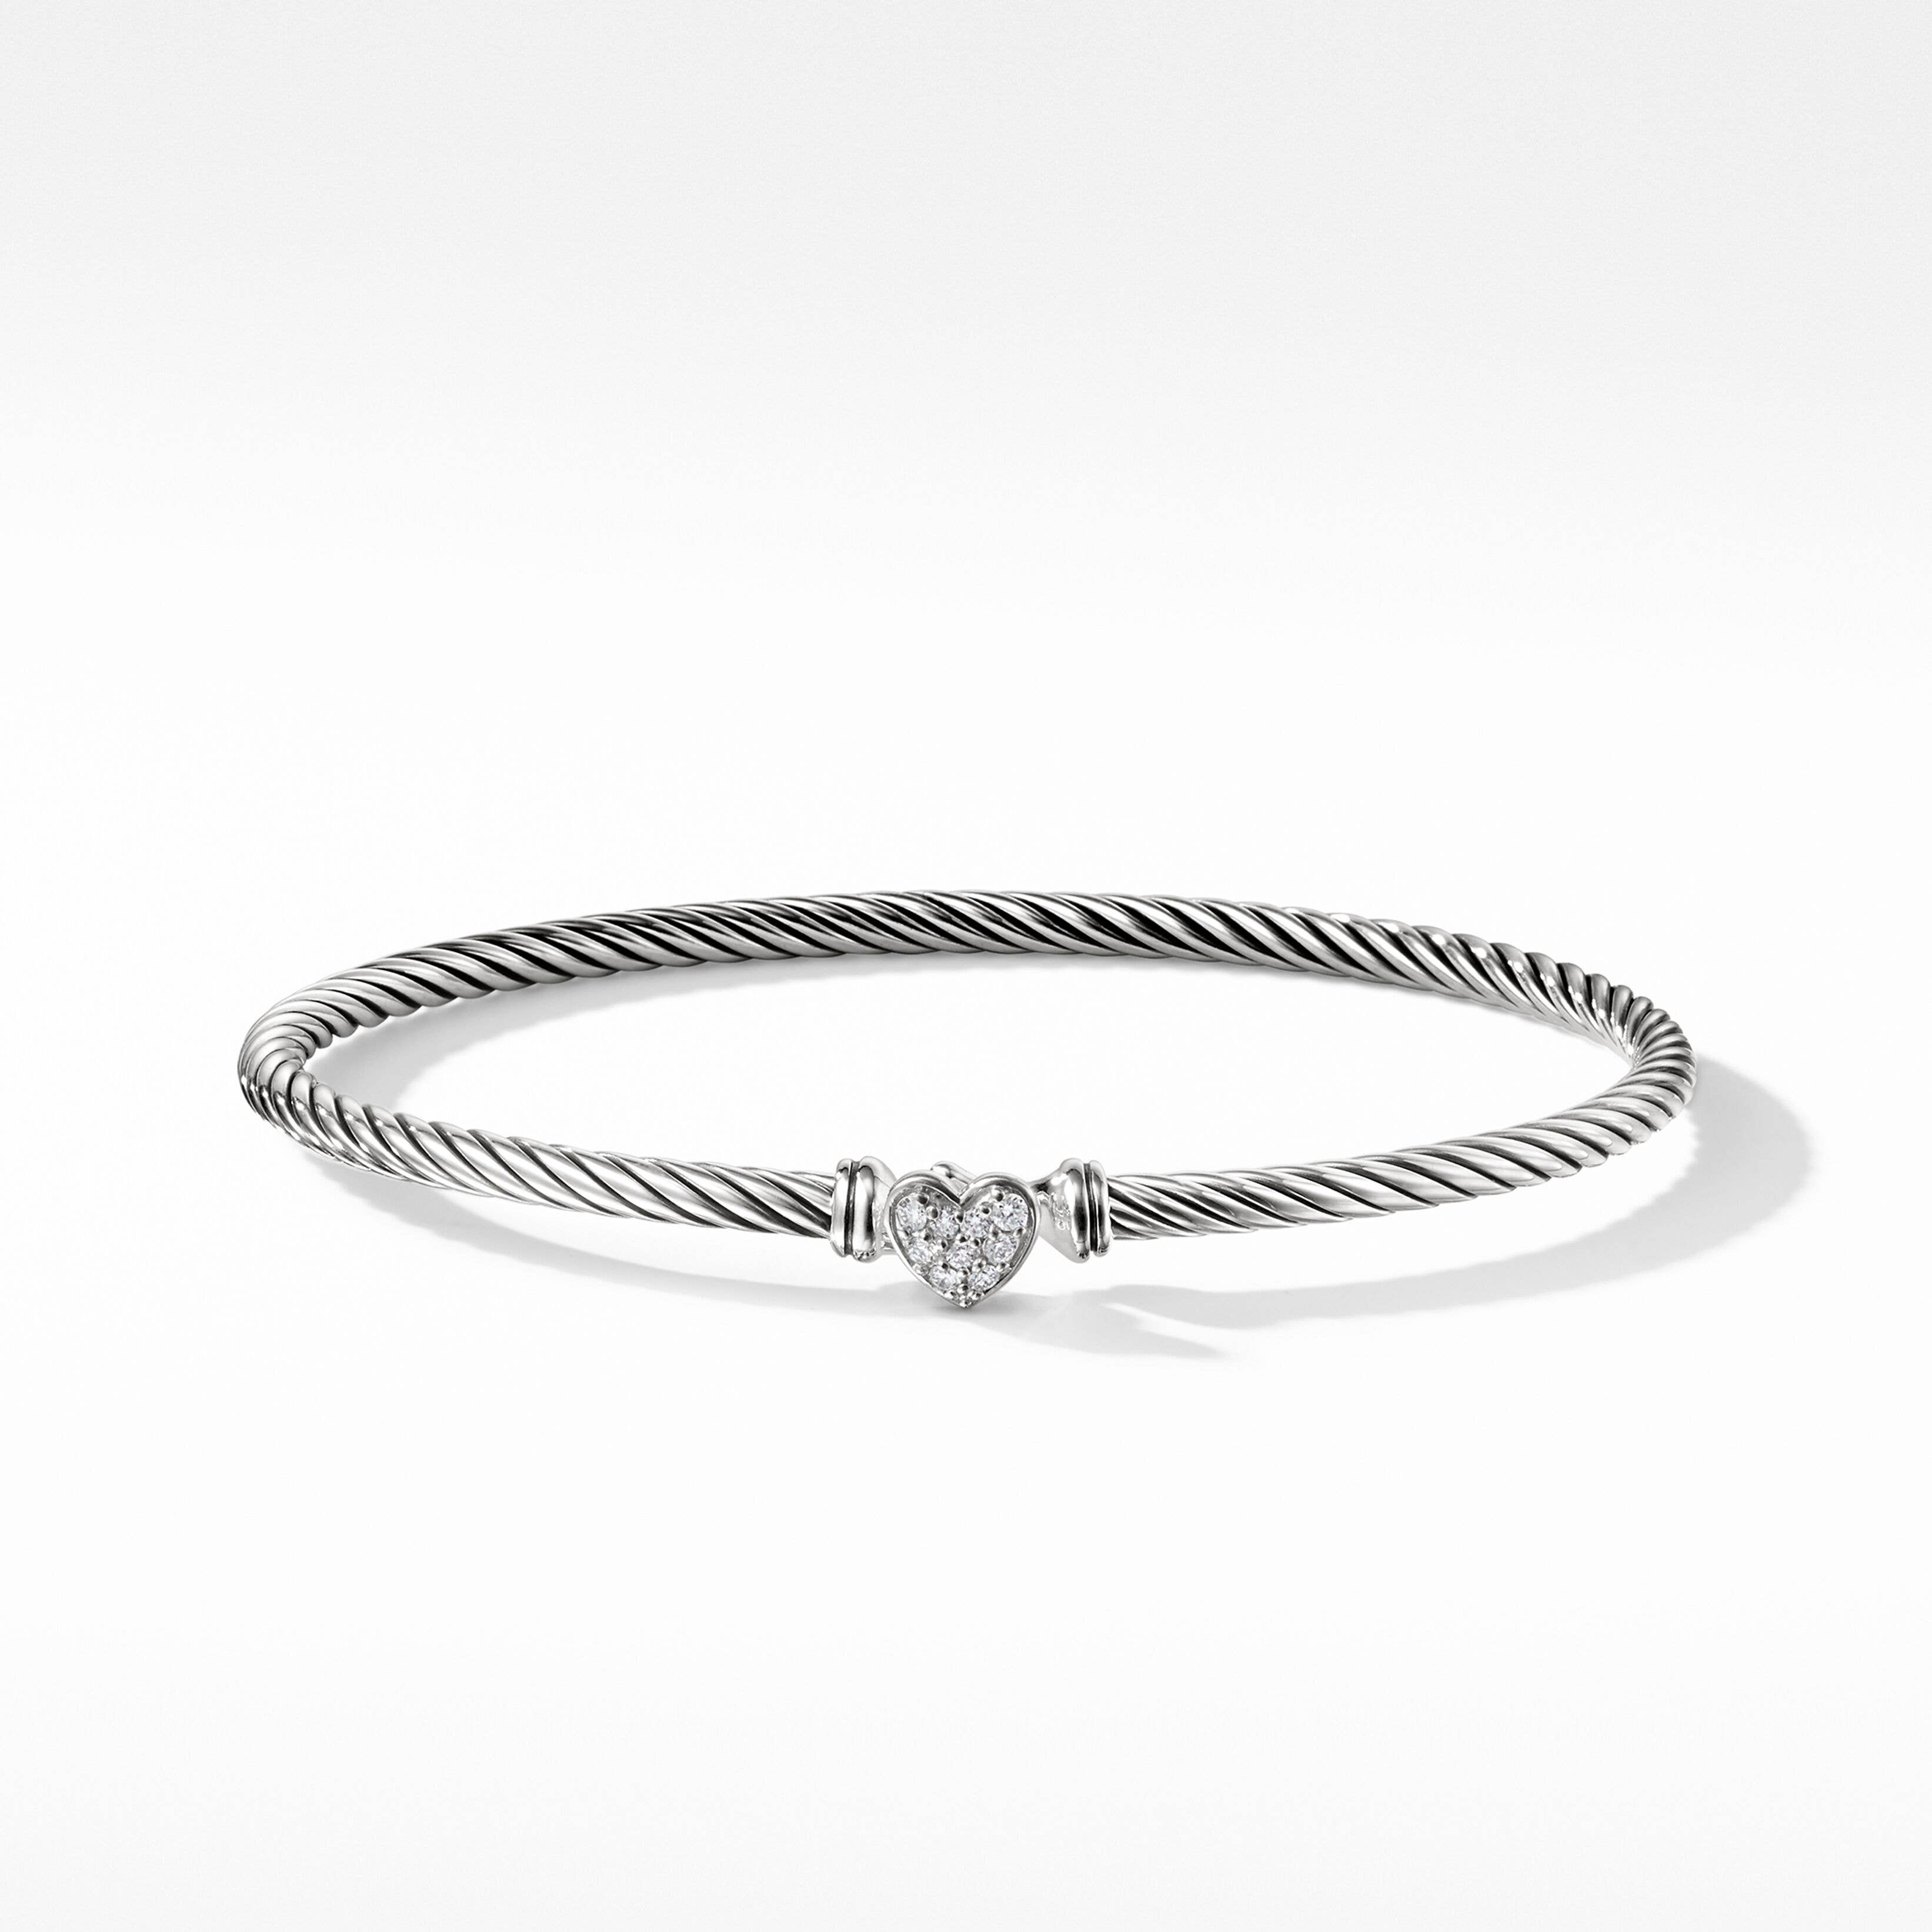 Cable Collectibles® Heart Bracelet in Sterling Silver with Pavé Diamonds